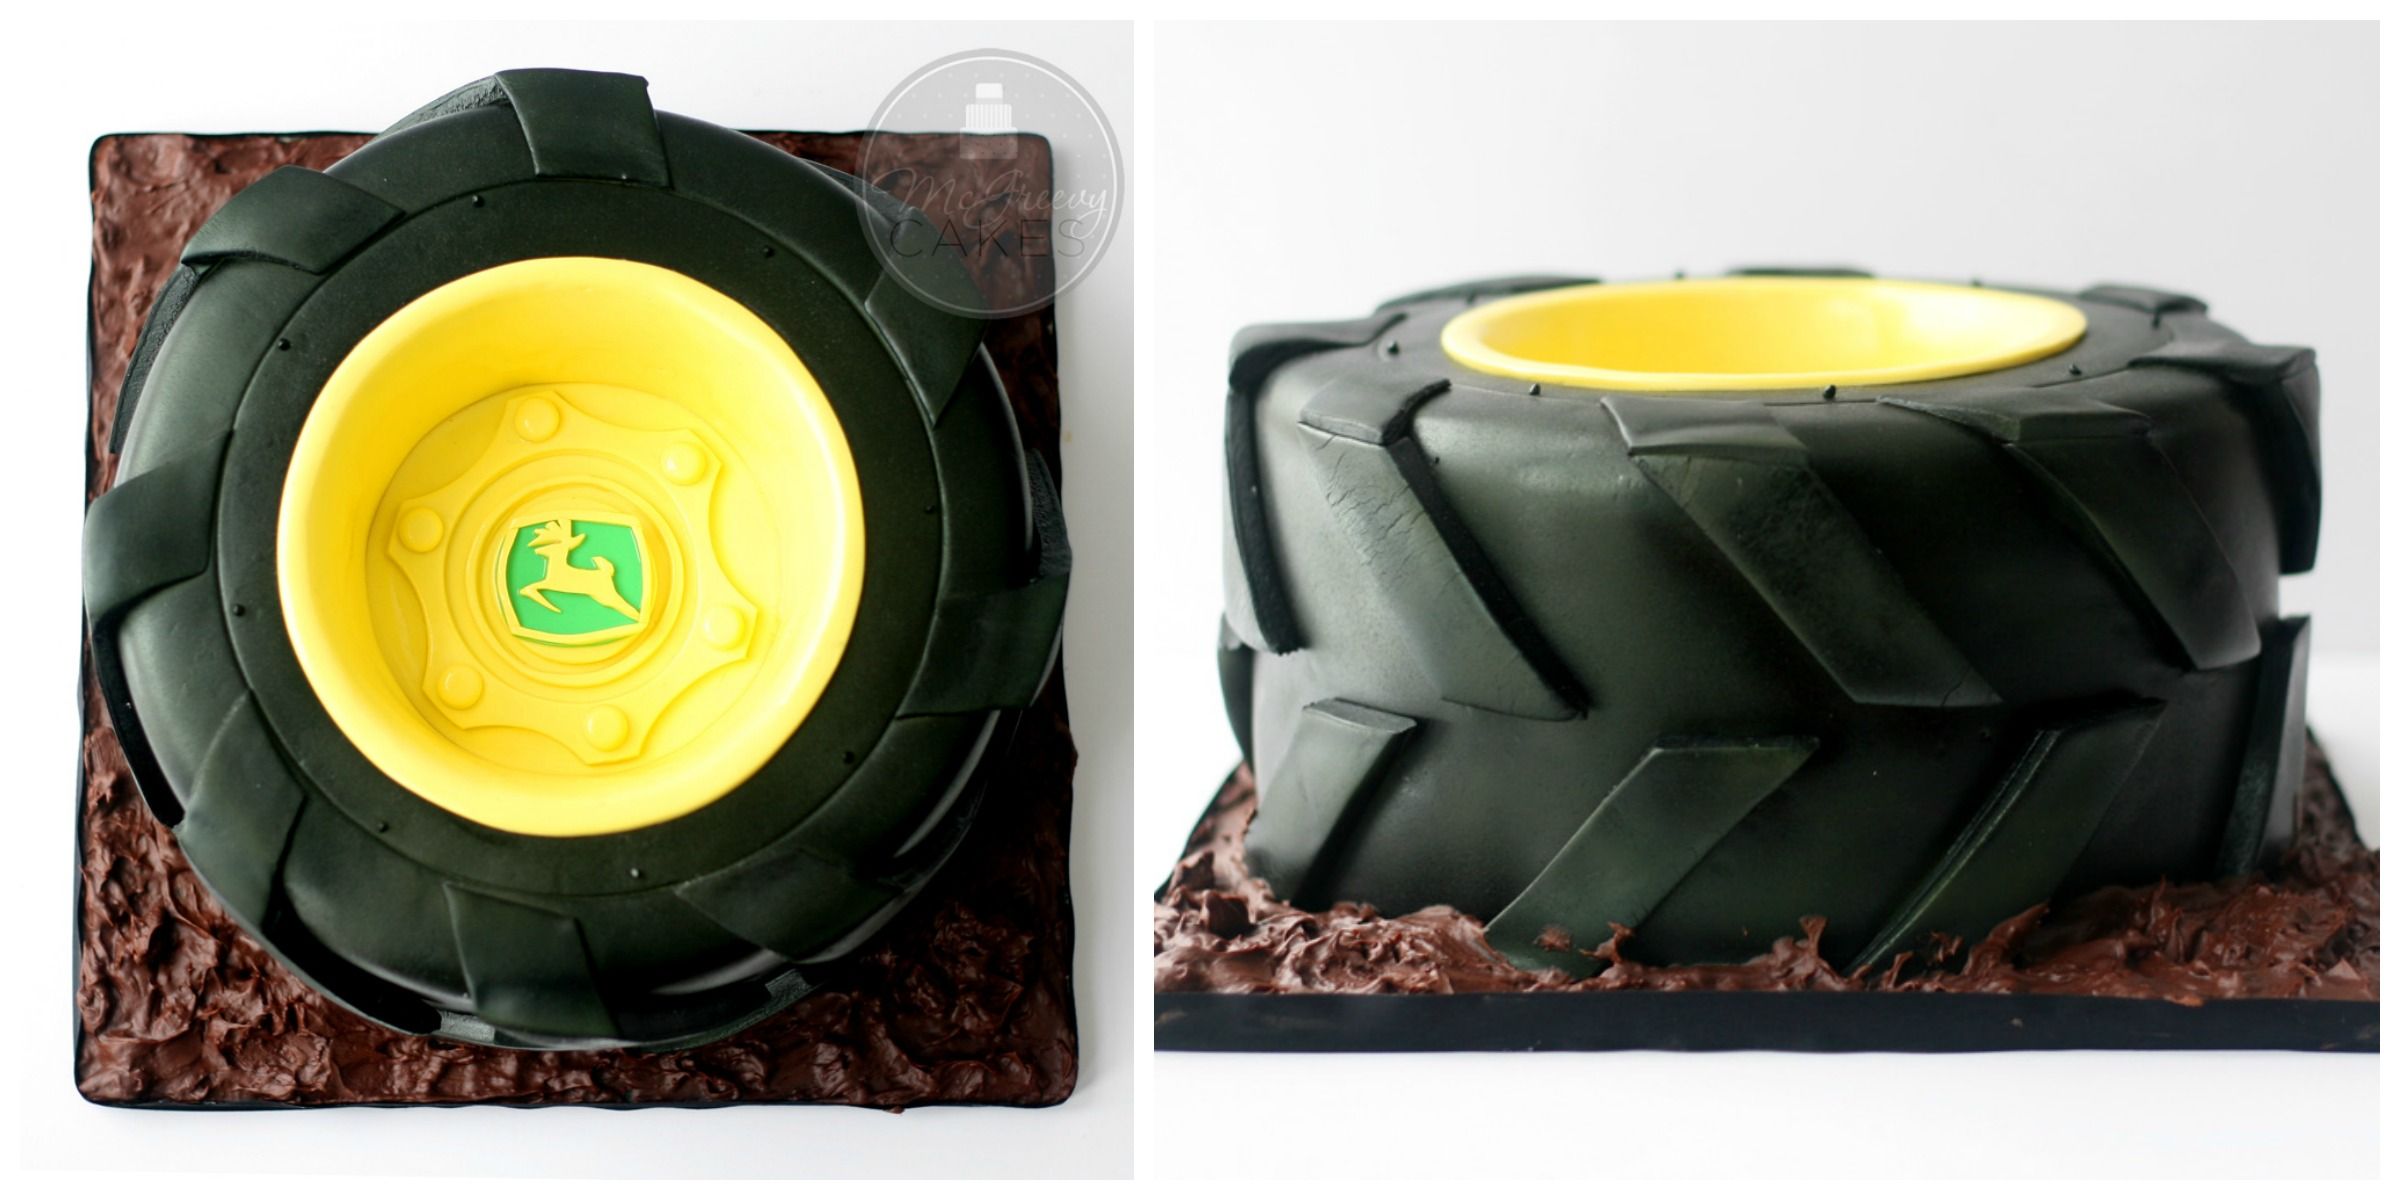 How To Make A Tractor Tire Cake Decorating A John Deere Cake